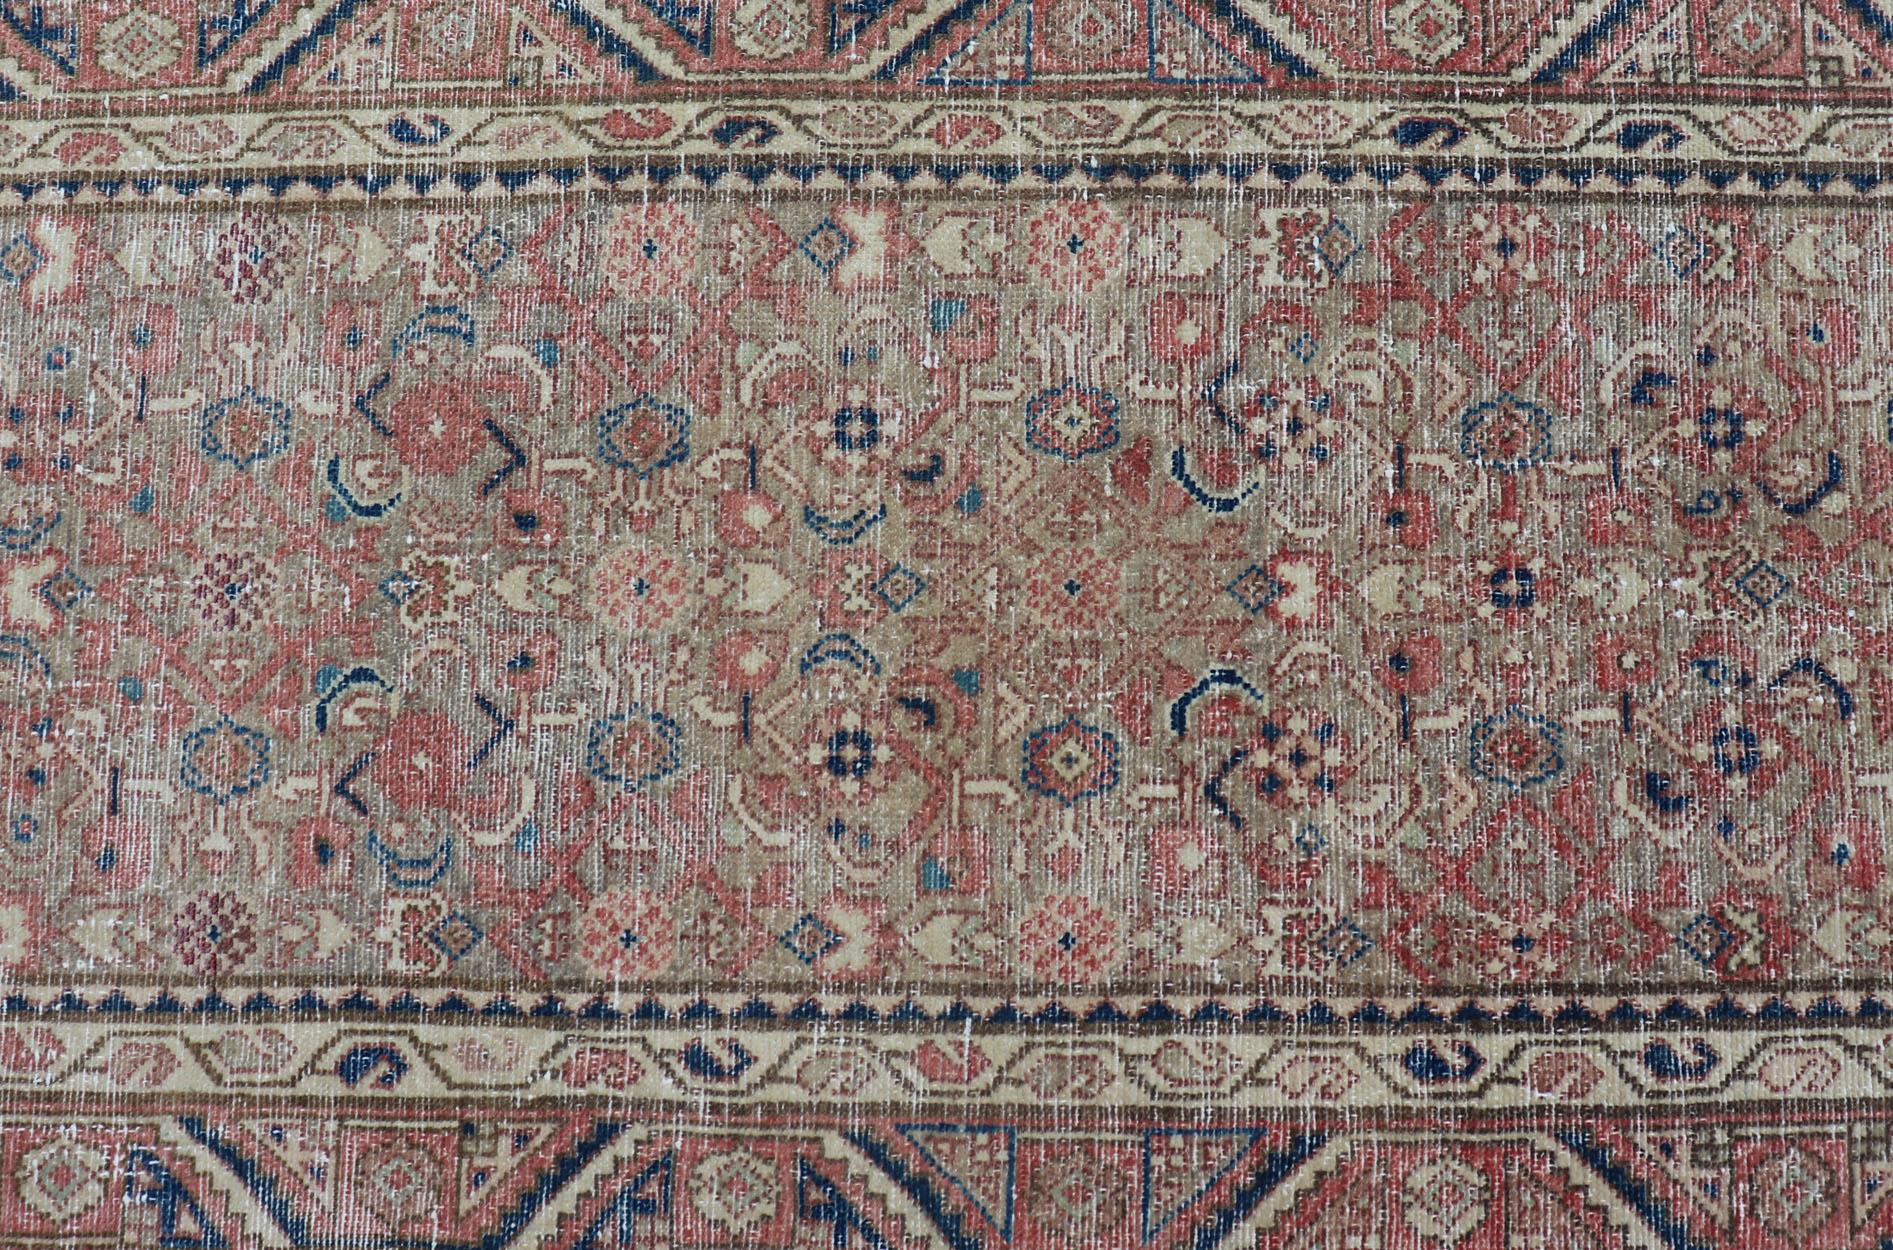 Antique Persian Malayer Runner in Tones of Blue, Salmon, Cream, and Tans For Sale 2